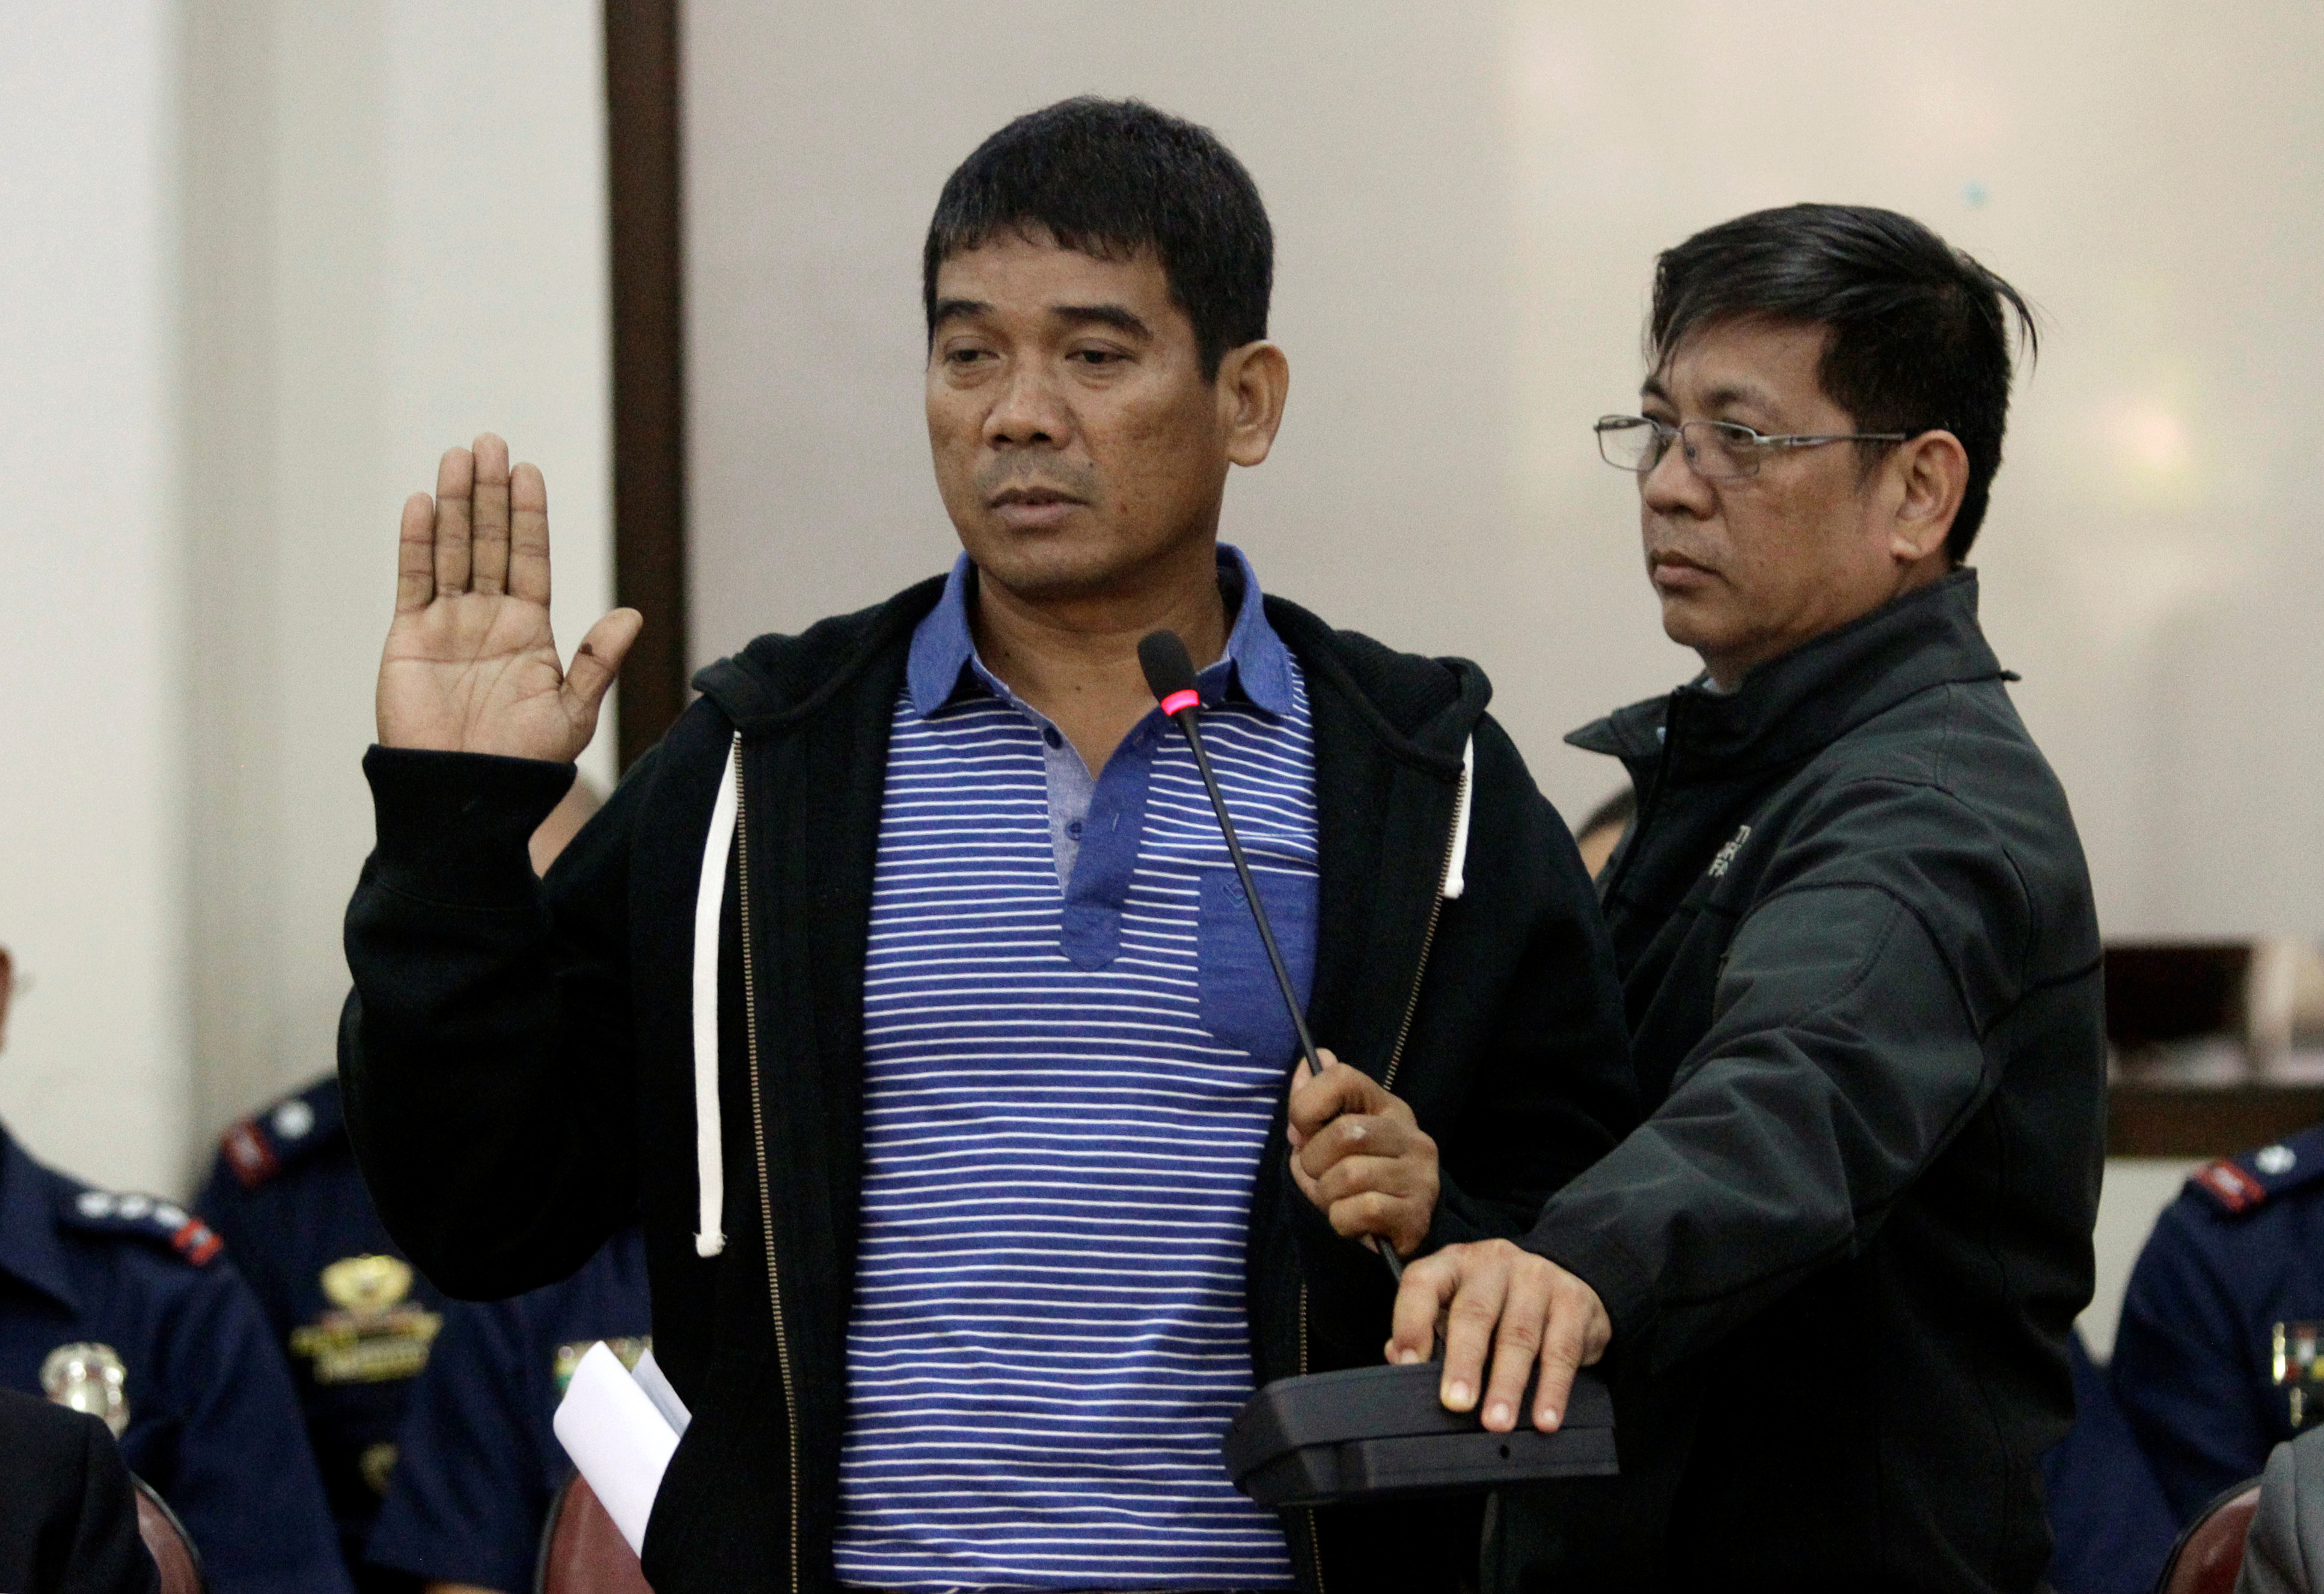 Ronnie Dayan, former aide and former lover of Senator Leila de Lima, takes an oath during a congressional committee hearing on the drug trade, inside the National Penitentiary, at the House of the Representatives in Manila on Nov. 24, 2016 (Czar Dance—Reuters)